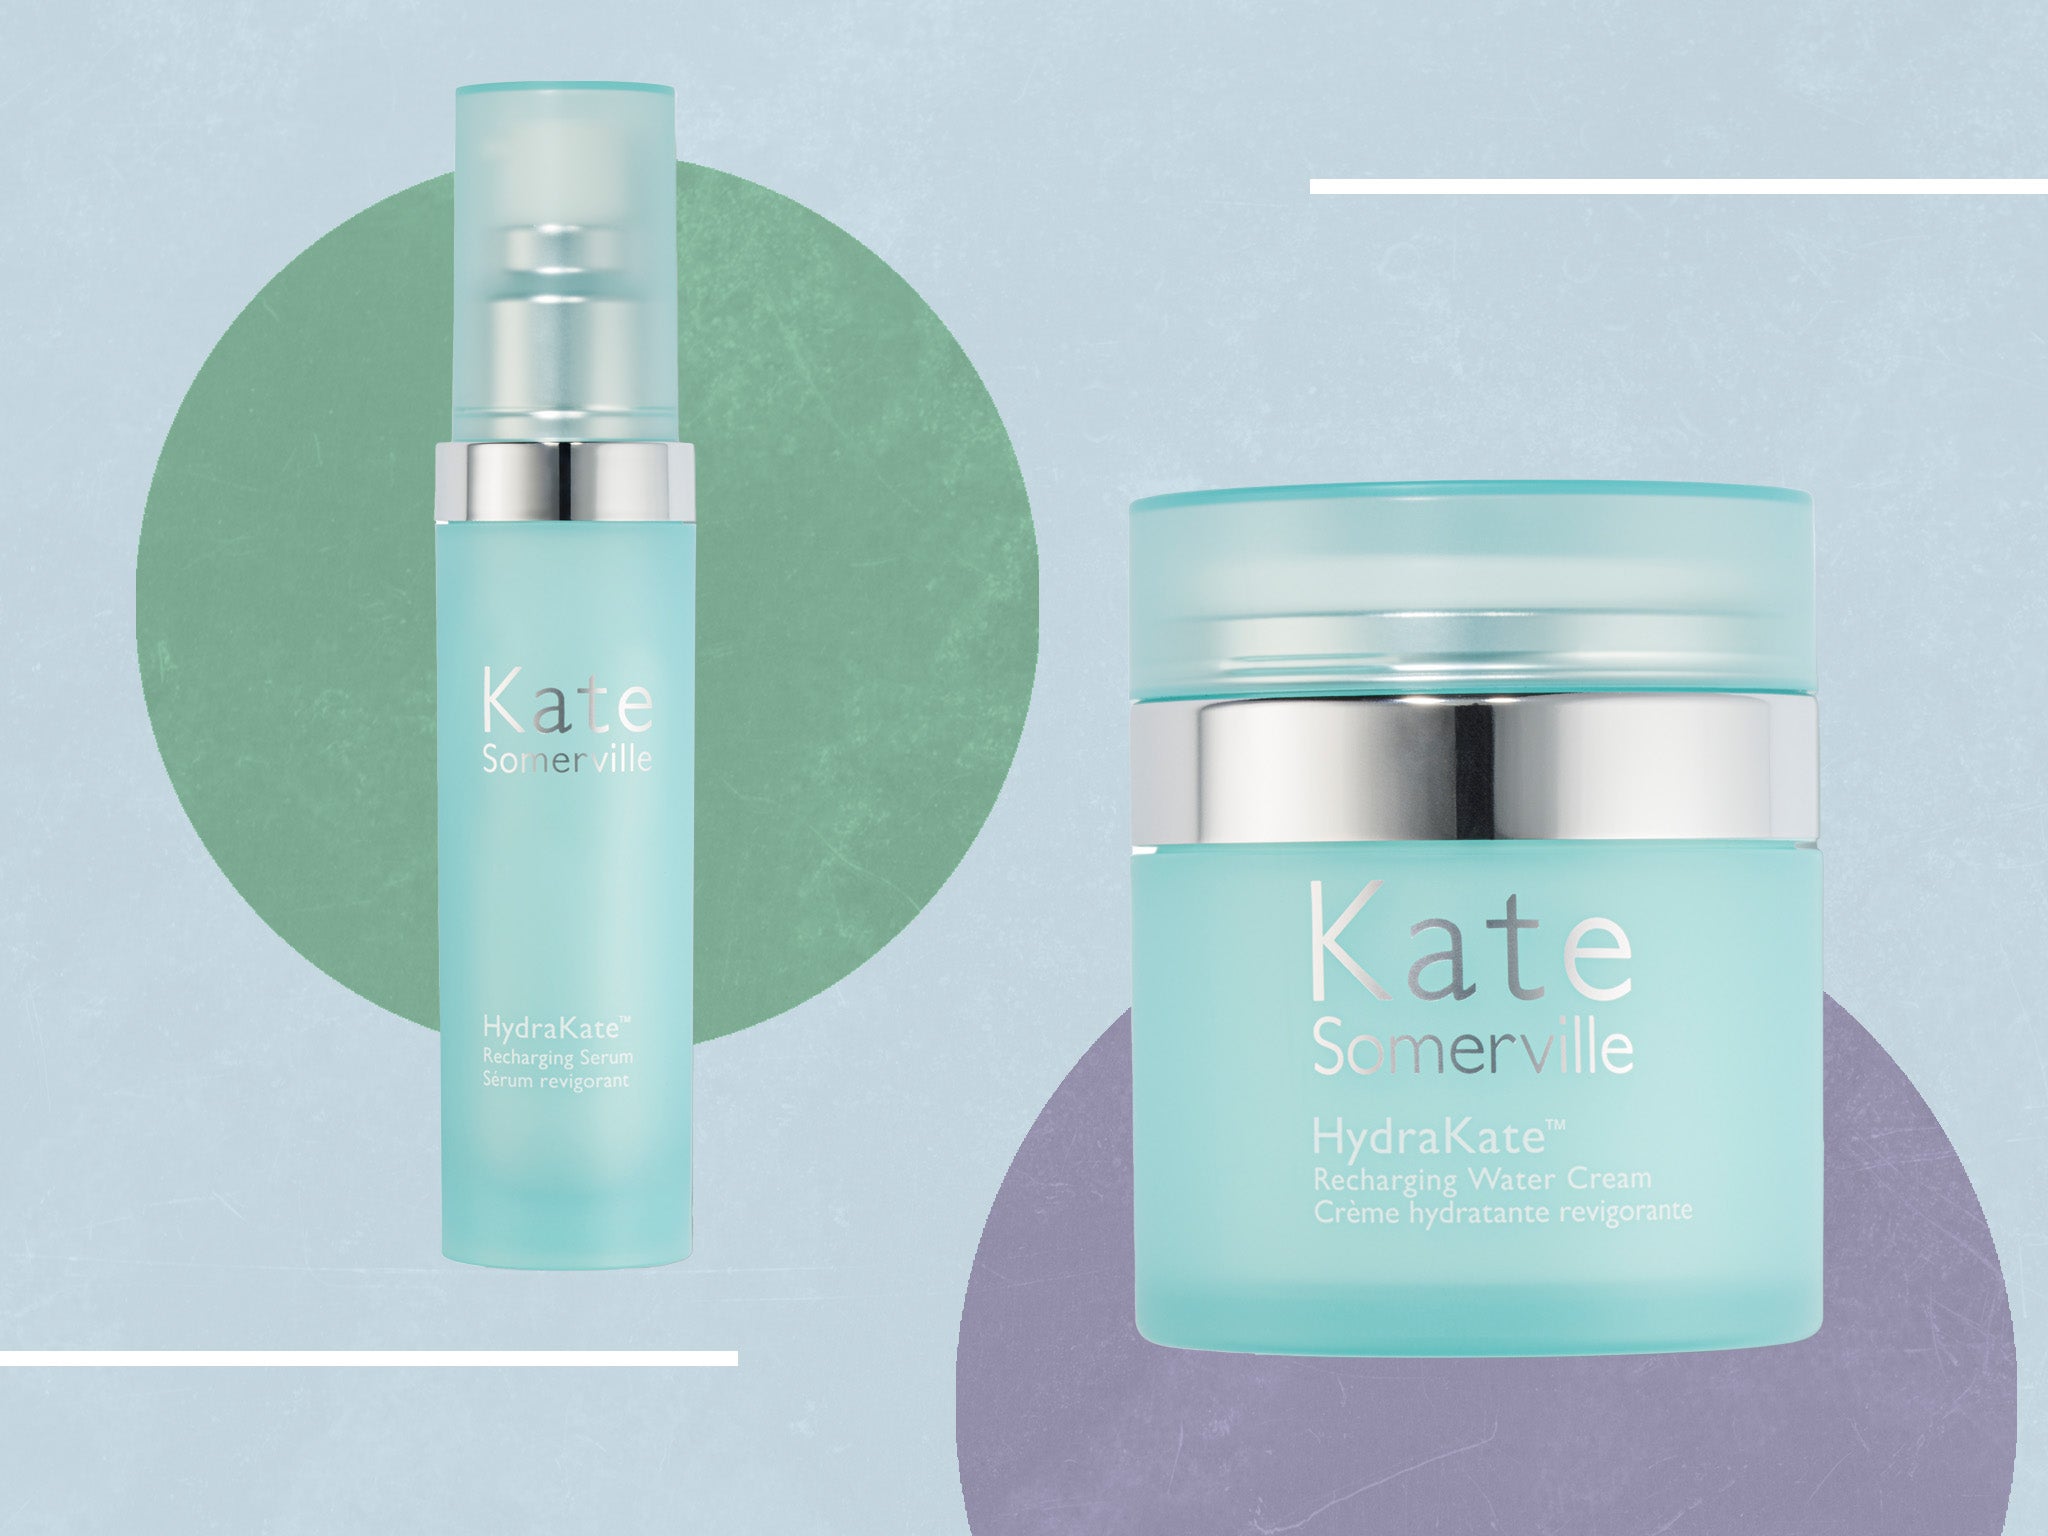 Both products include blue-light-activated algae extract, which is said to improve the look of dark spots, fine lines and wrinkles